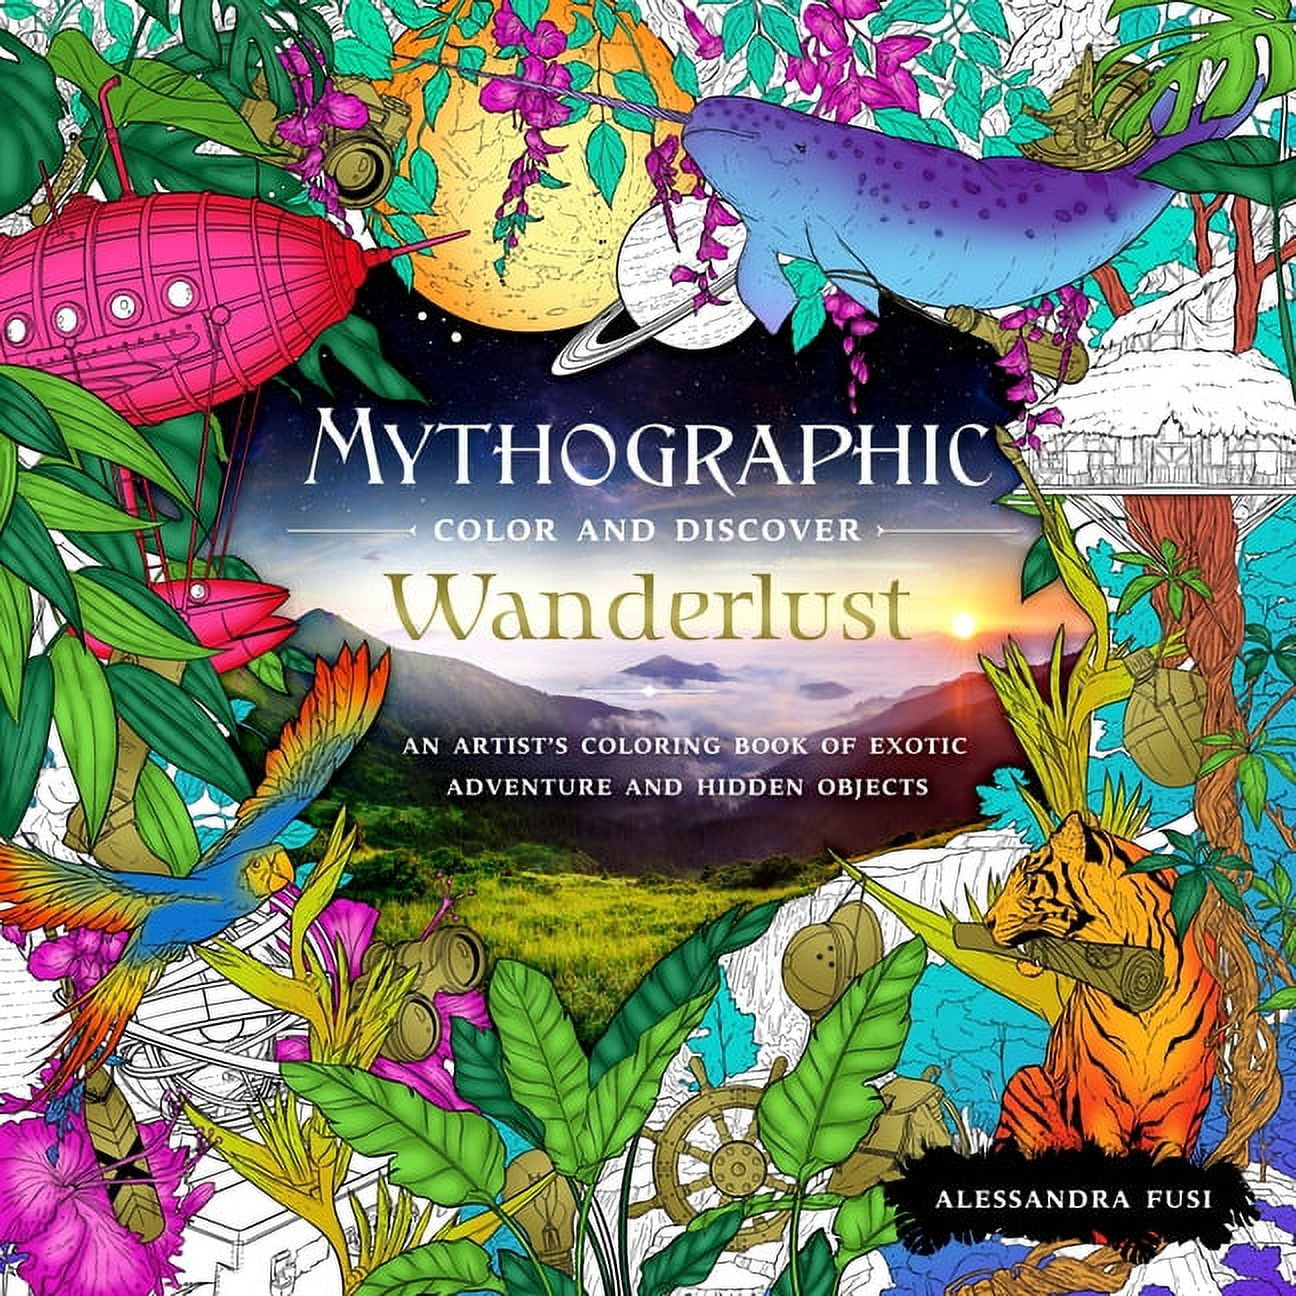 Mythographic Color and Discover: Wanderlust: An Artist's Coloring Book of Exotic Adventure and Hidden Objects [Book]